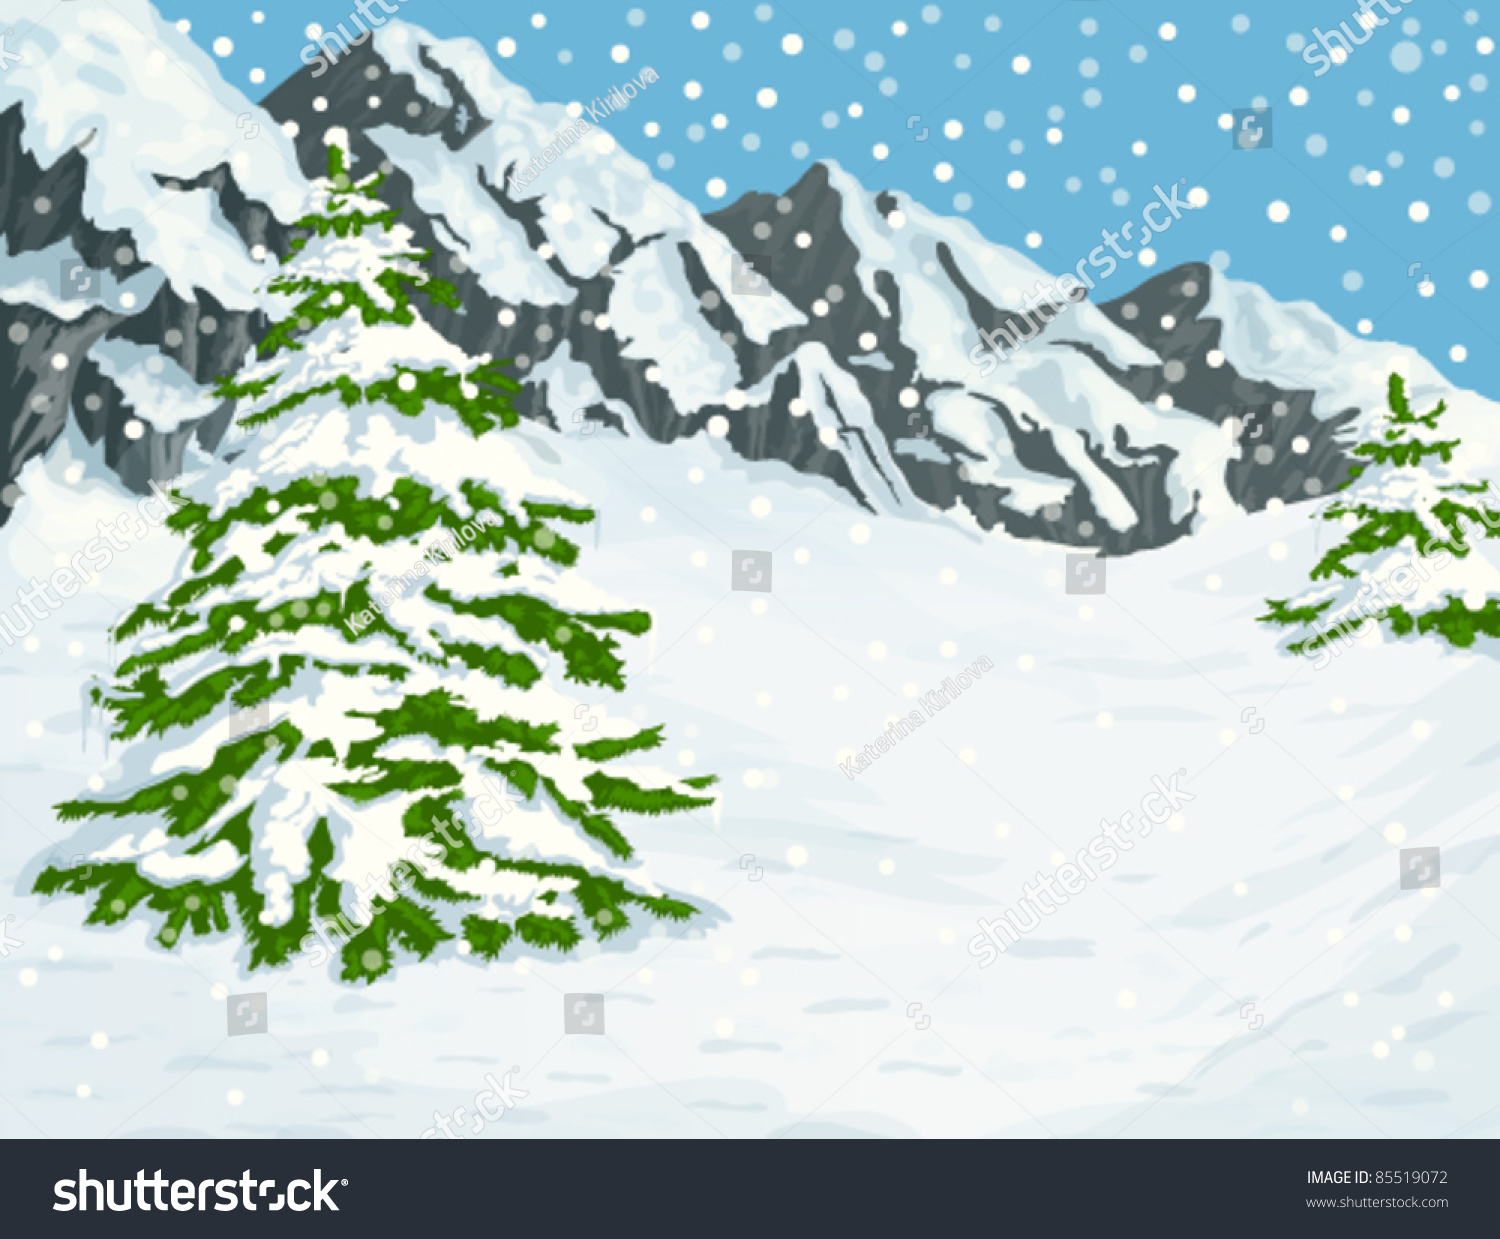 snow capped mountains clipart - photo #25